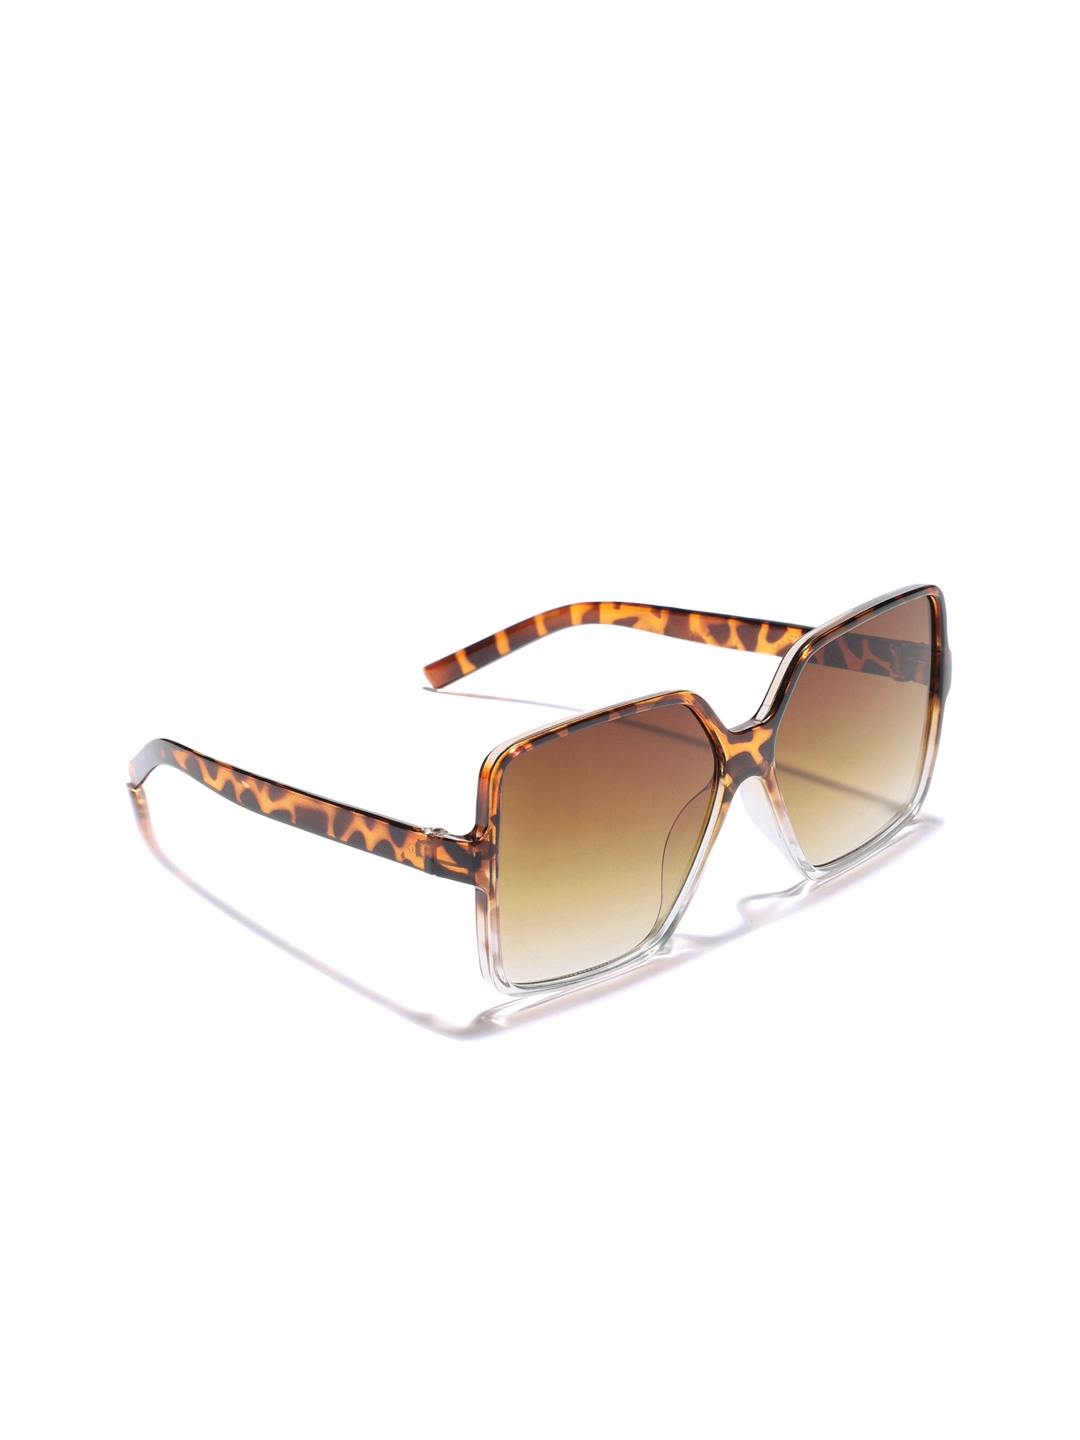 Buy Dressberry Unisex Brown Lens And Red Square Sunglasses With Uv Protected Lens Sunglasses For